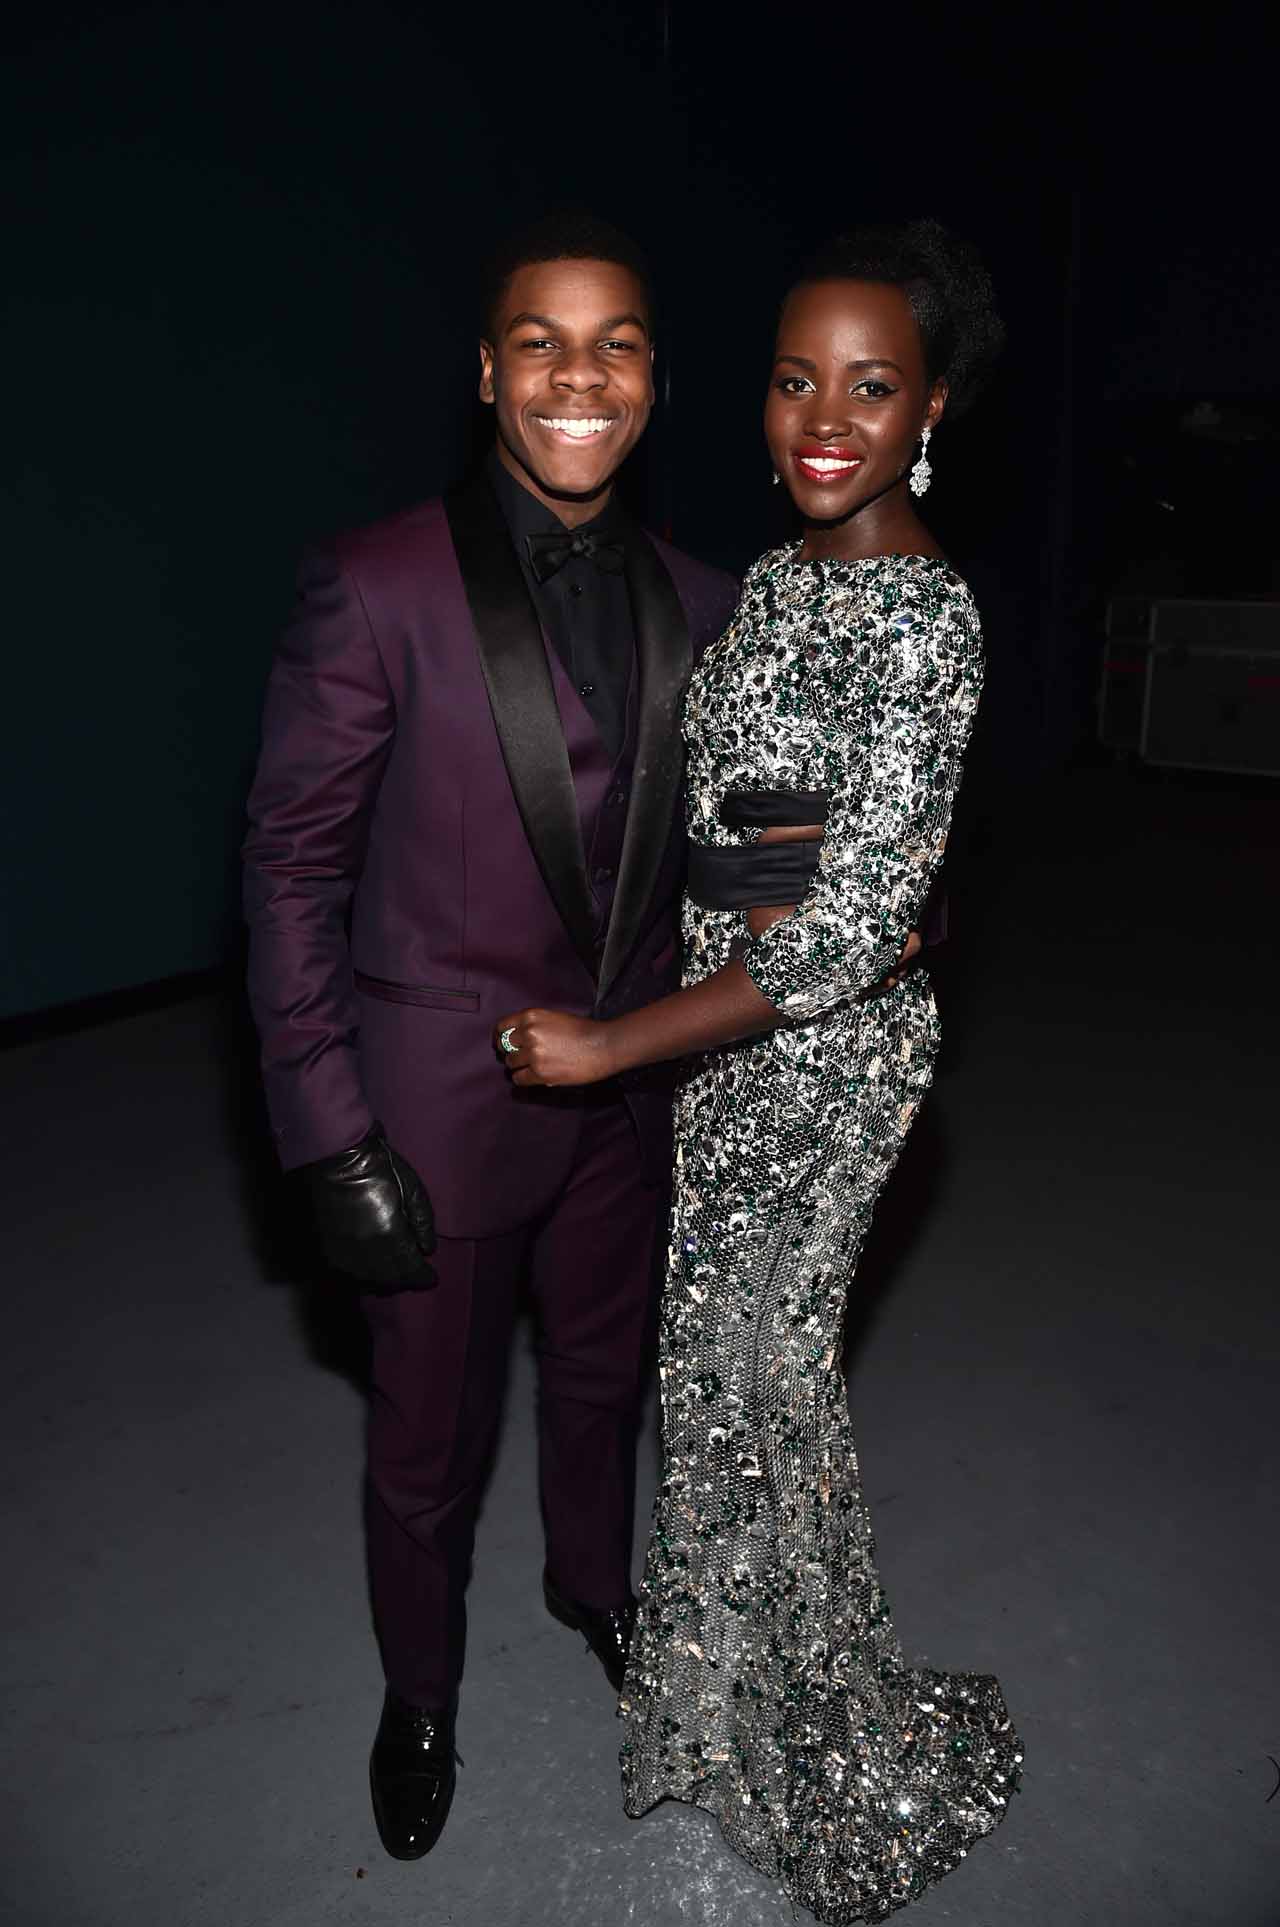 HOLLYWOOD, CA - DECEMBER 14: Actors John Boyega (L) and Lupita Nyong'o attend the World Premiere of ?Star Wars: The Force Awakens? at the Dolby, El Capitan, and TCL Theatres on December 14, 2015 in Hollywood, California.  (Photo by Alberto E. Rodriguez/Getty Images for Disney) *** Local Caption *** John Boyega;Lupita Nyong'o